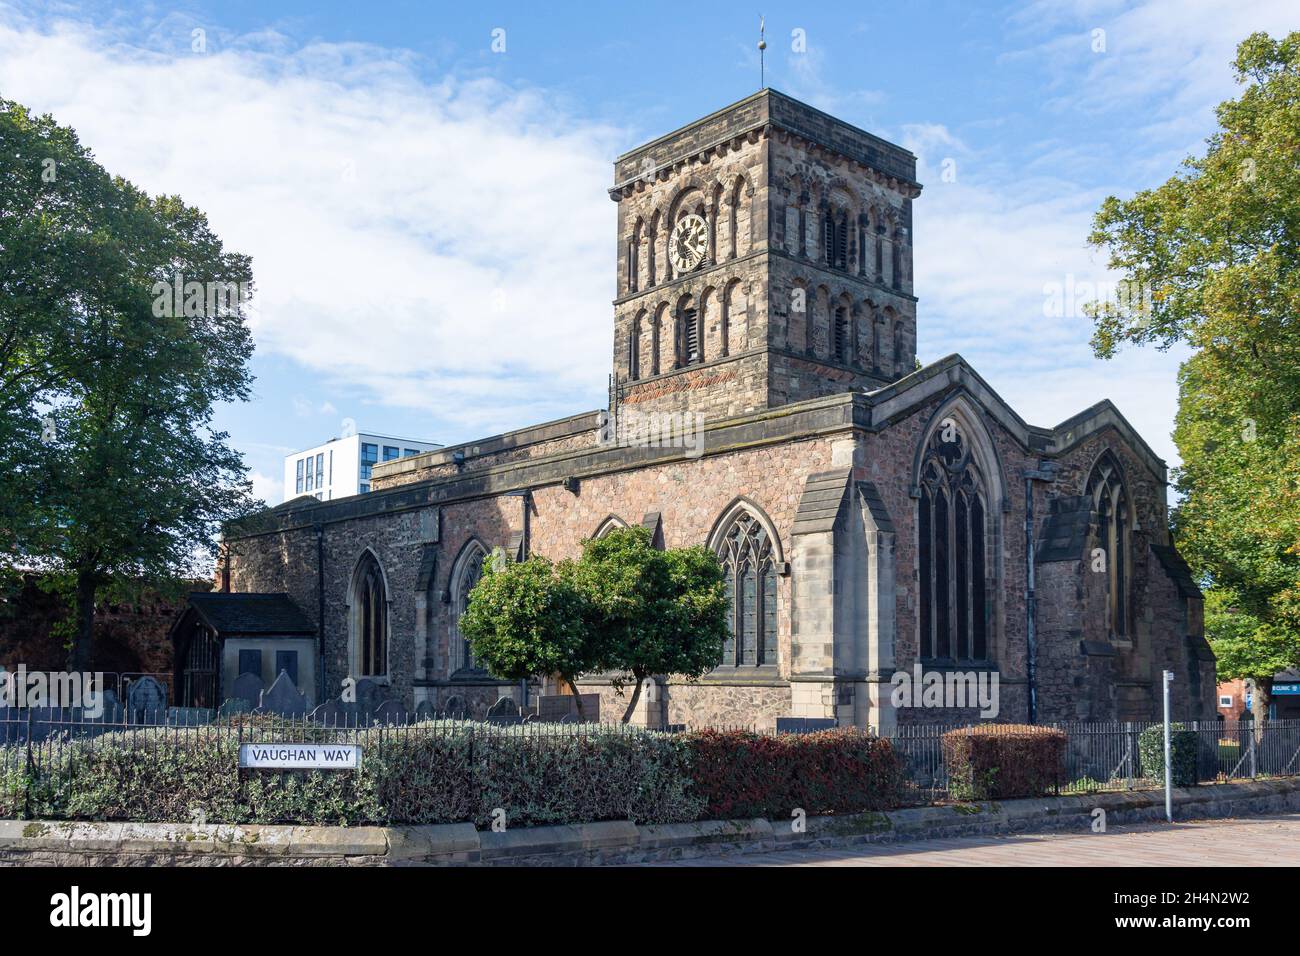 St Nicholas Church, Vaughan Way, City of Leicester, Leicestershire, England, United Kingdom Stock Photo